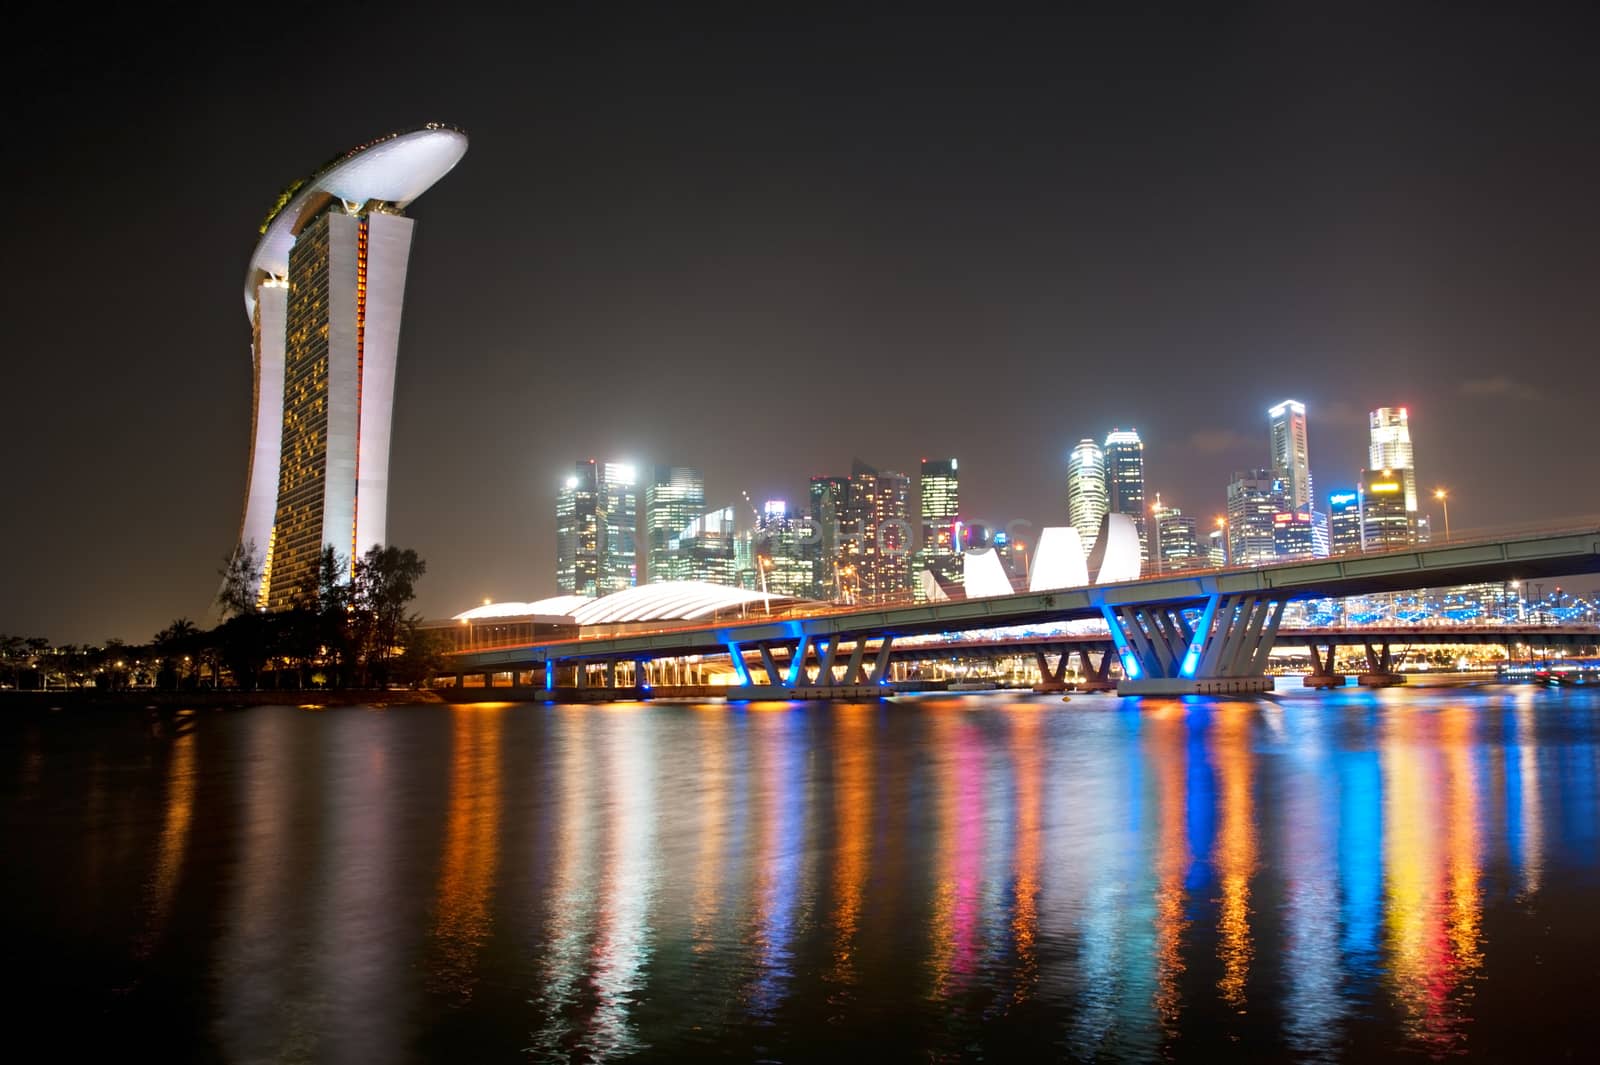 Skyline of Singapore at night with colorful neon lights